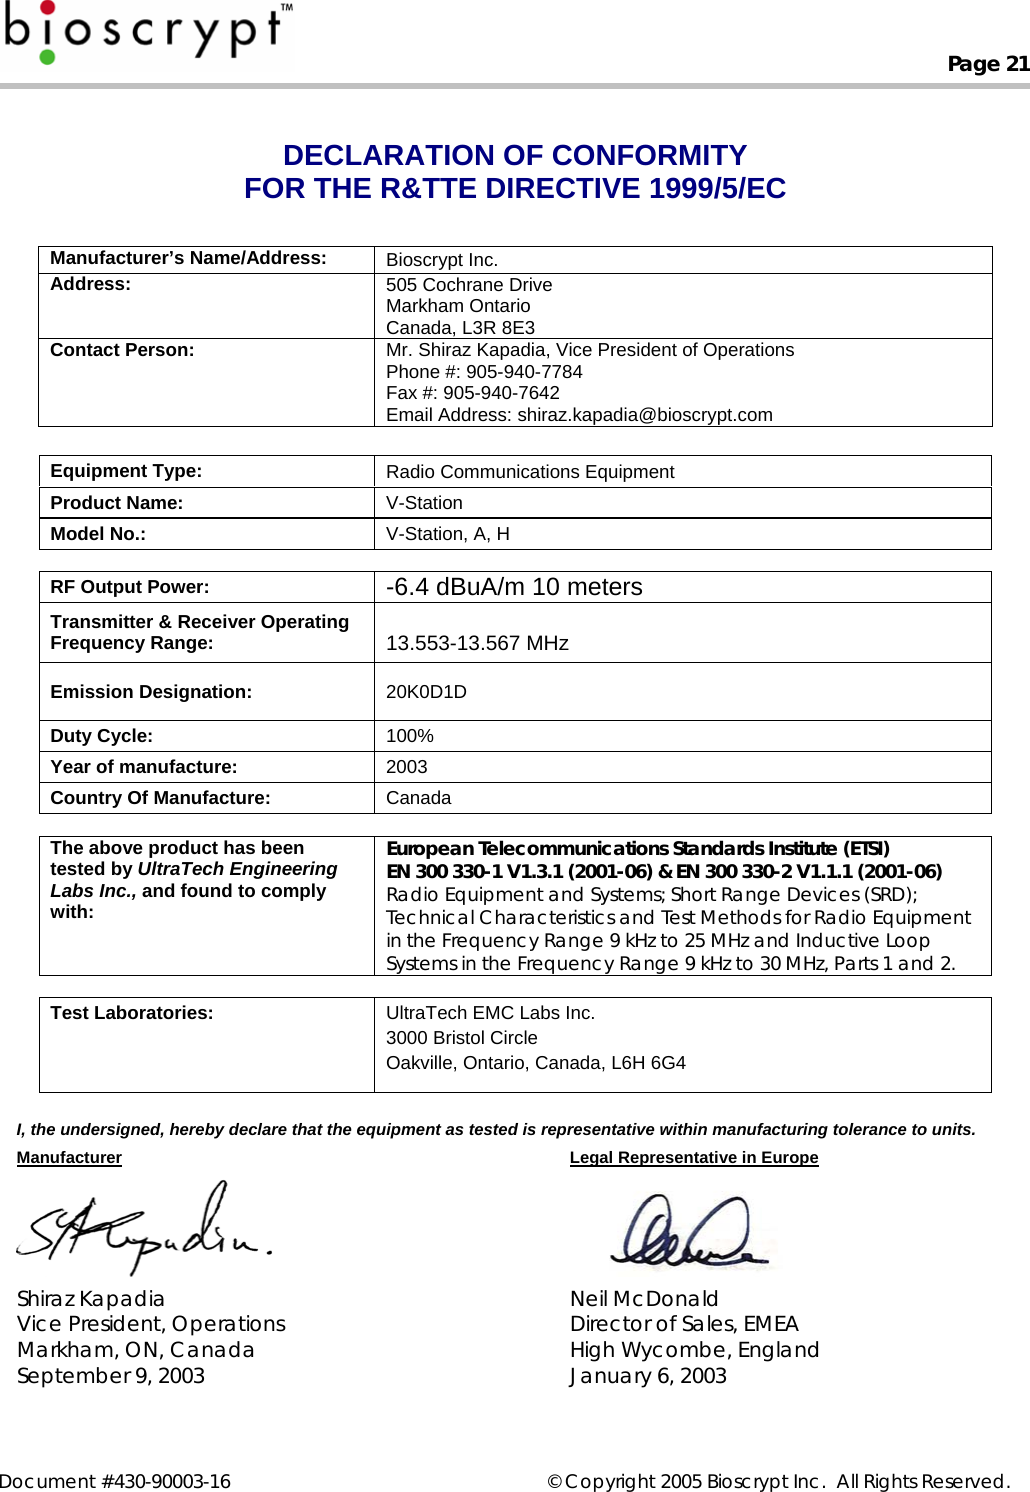  Page 21   Document #430-90003-16    © Copyright 2005 Bioscrypt Inc.  All Rights Reserved. DECLARATION OF CONFORMITY FOR THE R&amp;TTE DIRECTIVE 1999/5/EC   Manufacturer’s Name/Address:  Bioscrypt Inc. Address:   505 Cochrane Drive Markham Ontario Canada, L3R 8E3 Contact Person:  Mr. Shiraz Kapadia, Vice President of Operations Phone #: 905-940-7784 Fax #: 905-940-7642 Email Address: shiraz.kapadia@bioscrypt.com  Equipment Type:  Radio Communications Equipment Product Name:  V-Station Model No.:  V-Station, A, H   RF Output Power:  -6.4 dBuA/m 10 meters Transmitter &amp; Receiver Operating Frequency Range:   13.553-13.567 MHz Emission Designation:  20K0D1D Duty Cycle:  100% Year of manufacture:  2003 Country Of Manufacture:  Canada  The above product has been tested by UltraTech Engineering Labs Inc., and found to comply with: European Telecommunications Standards Institute (ETSI) EN 300 330-1 V1.3.1 (2001-06) &amp; EN 300 330-2 V1.1.1 (2001-06) Radio Equipment and Systems; Short Range Devices (SRD); Technical Characteristics and Test Methods for Radio Equipment in the Frequency Range 9 kHz to 25 MHz and Inductive Loop Systems in the Frequency Range 9 kHz to 30 MHz, Parts 1 and 2.  Test Laboratories:  UltraTech EMC Labs Inc. 3000 Bristol Circle Oakville, Ontario, Canada, L6H 6G4  I, the undersigned, hereby declare that the equipment as tested is representative within manufacturing tolerance to units. Manufacturer Legal Representative in Europe   Shiraz Kapadia  Neil McDonald Vice President, Operations  Director of Sales, EMEA Markham, ON, Canada  High Wycombe, England September 9, 2003  January 6, 2003 